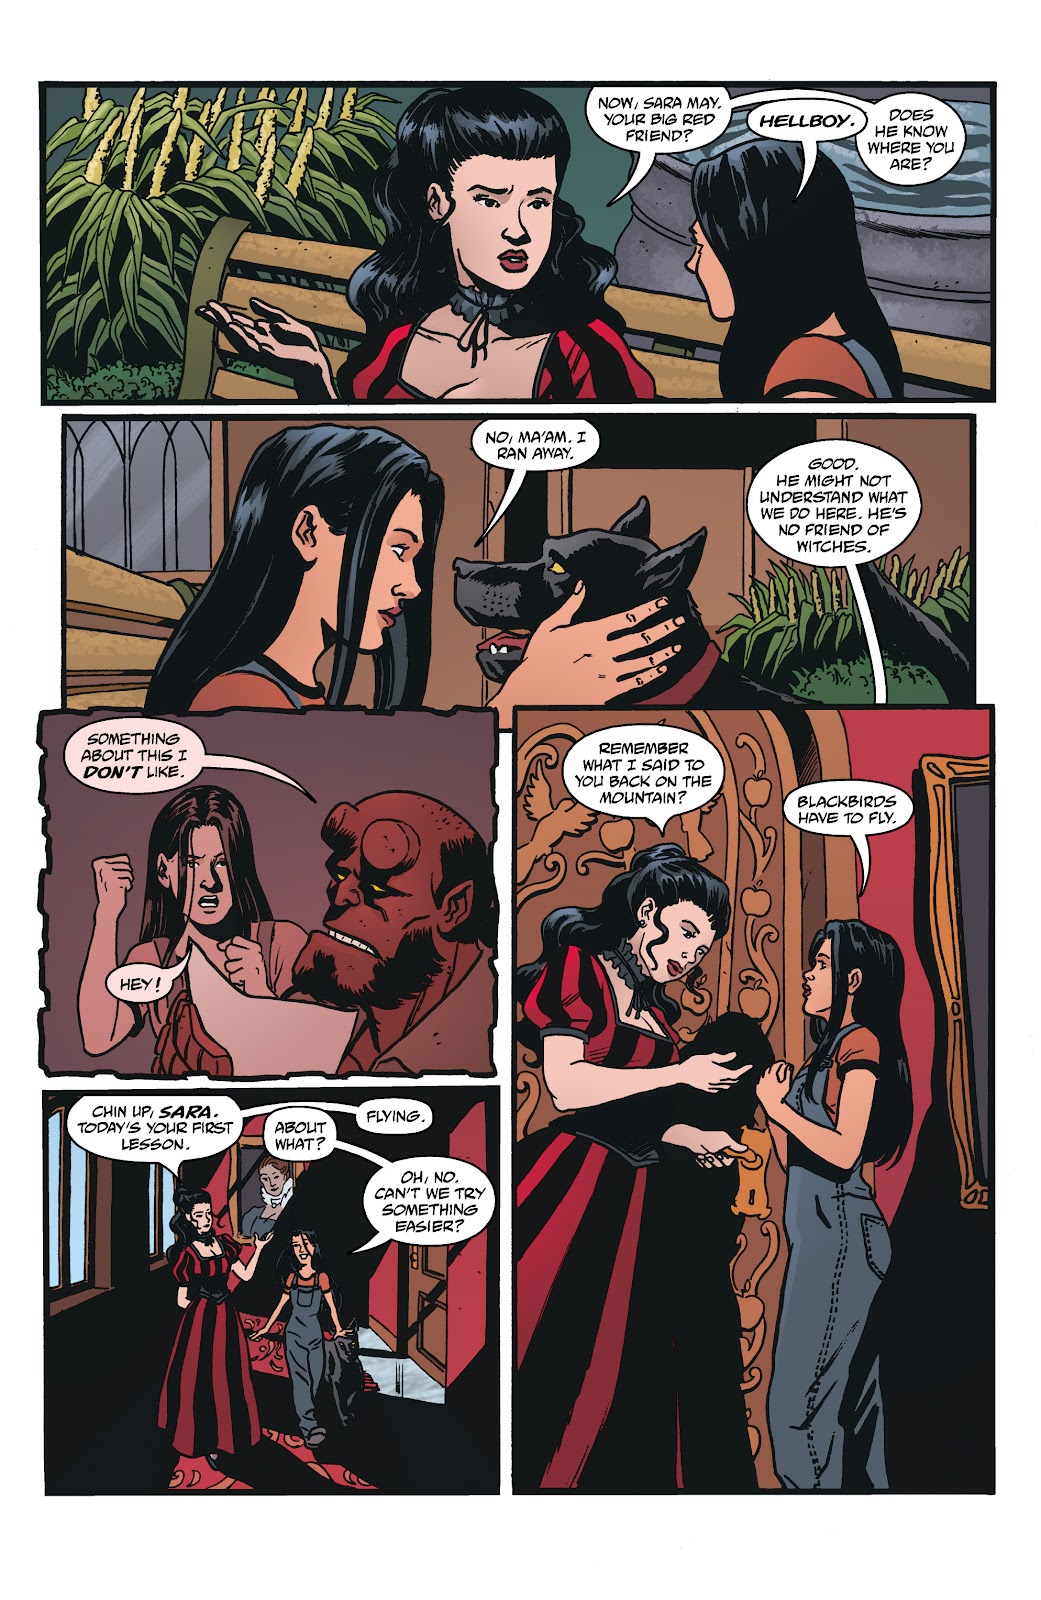 Castle Full of Blackbirds issue 1 - Page 16